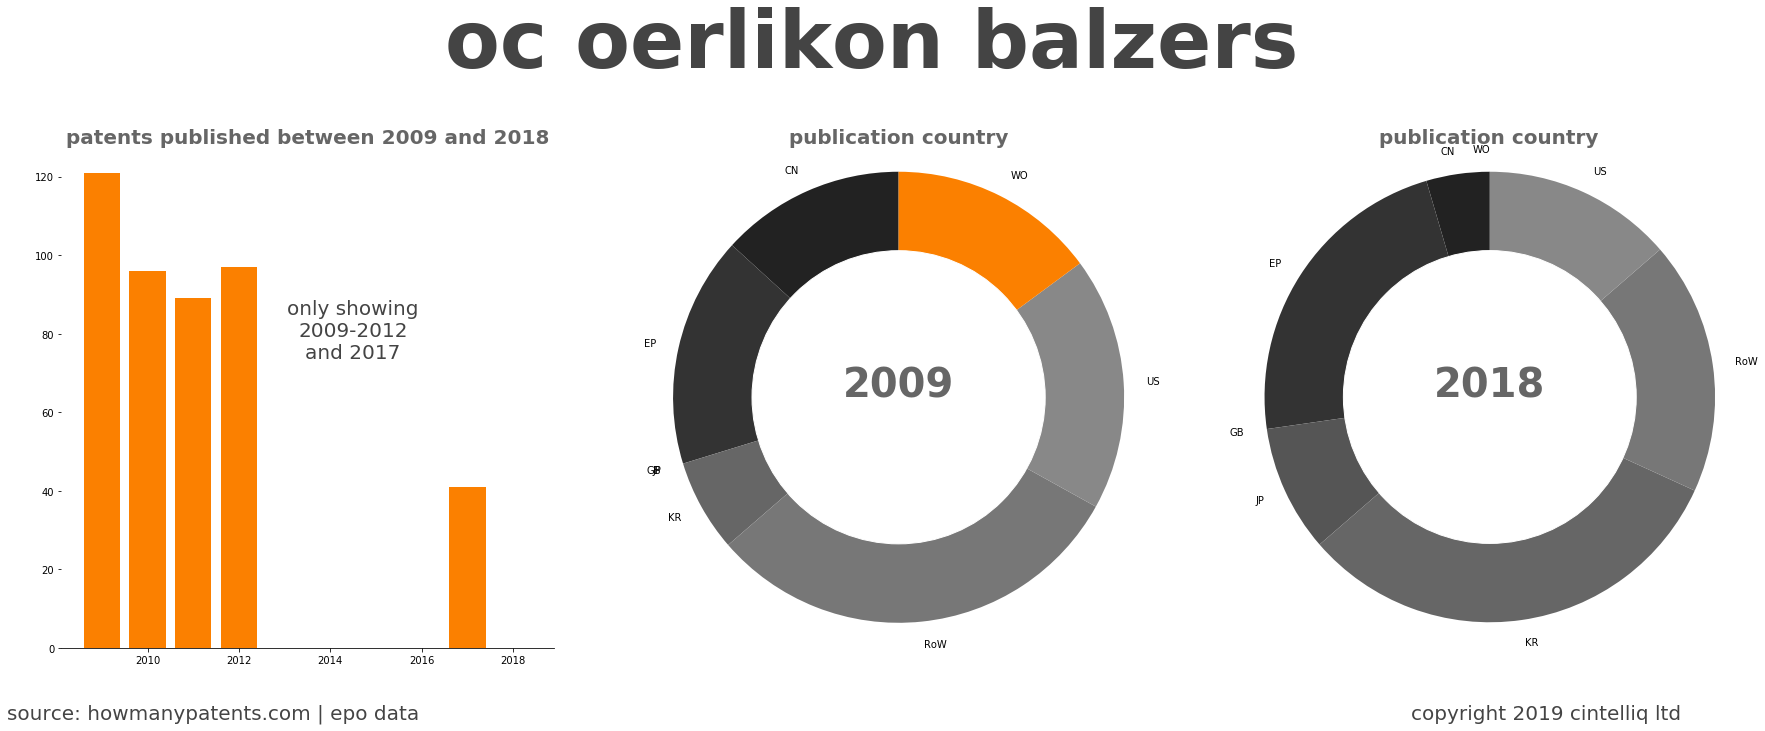 summary of patents for Oc Oerlikon Balzers